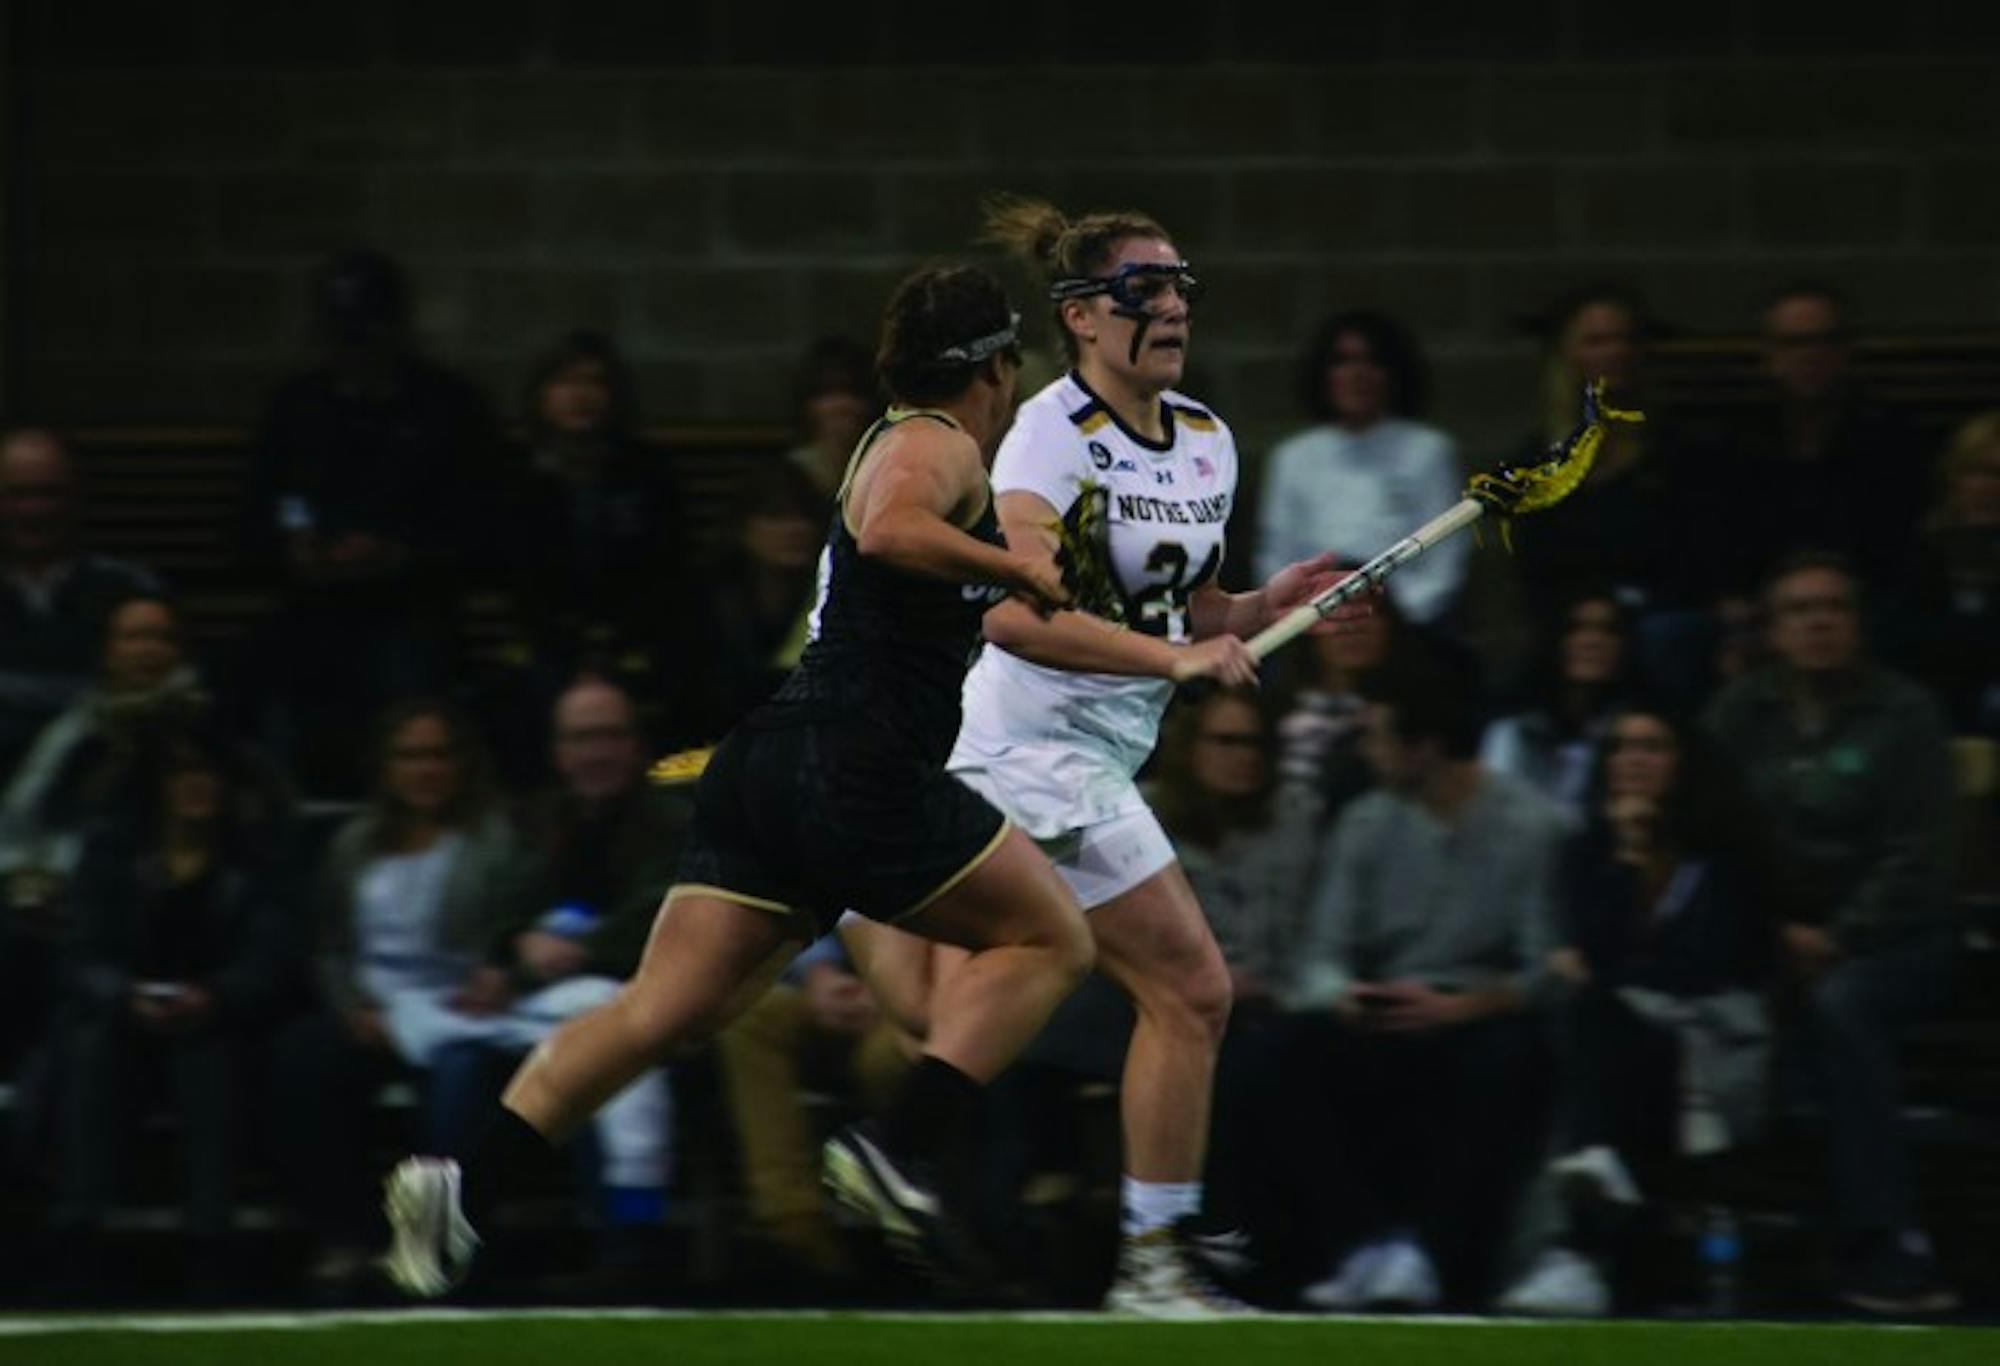 Irish junior midfielder Casey Pearsall carries the ball down the field during Notre Dame’s 14-4 win over Colorado on Friday at Loftus Sports Center. Pearsall had a goal and two assists in the Irish victory.